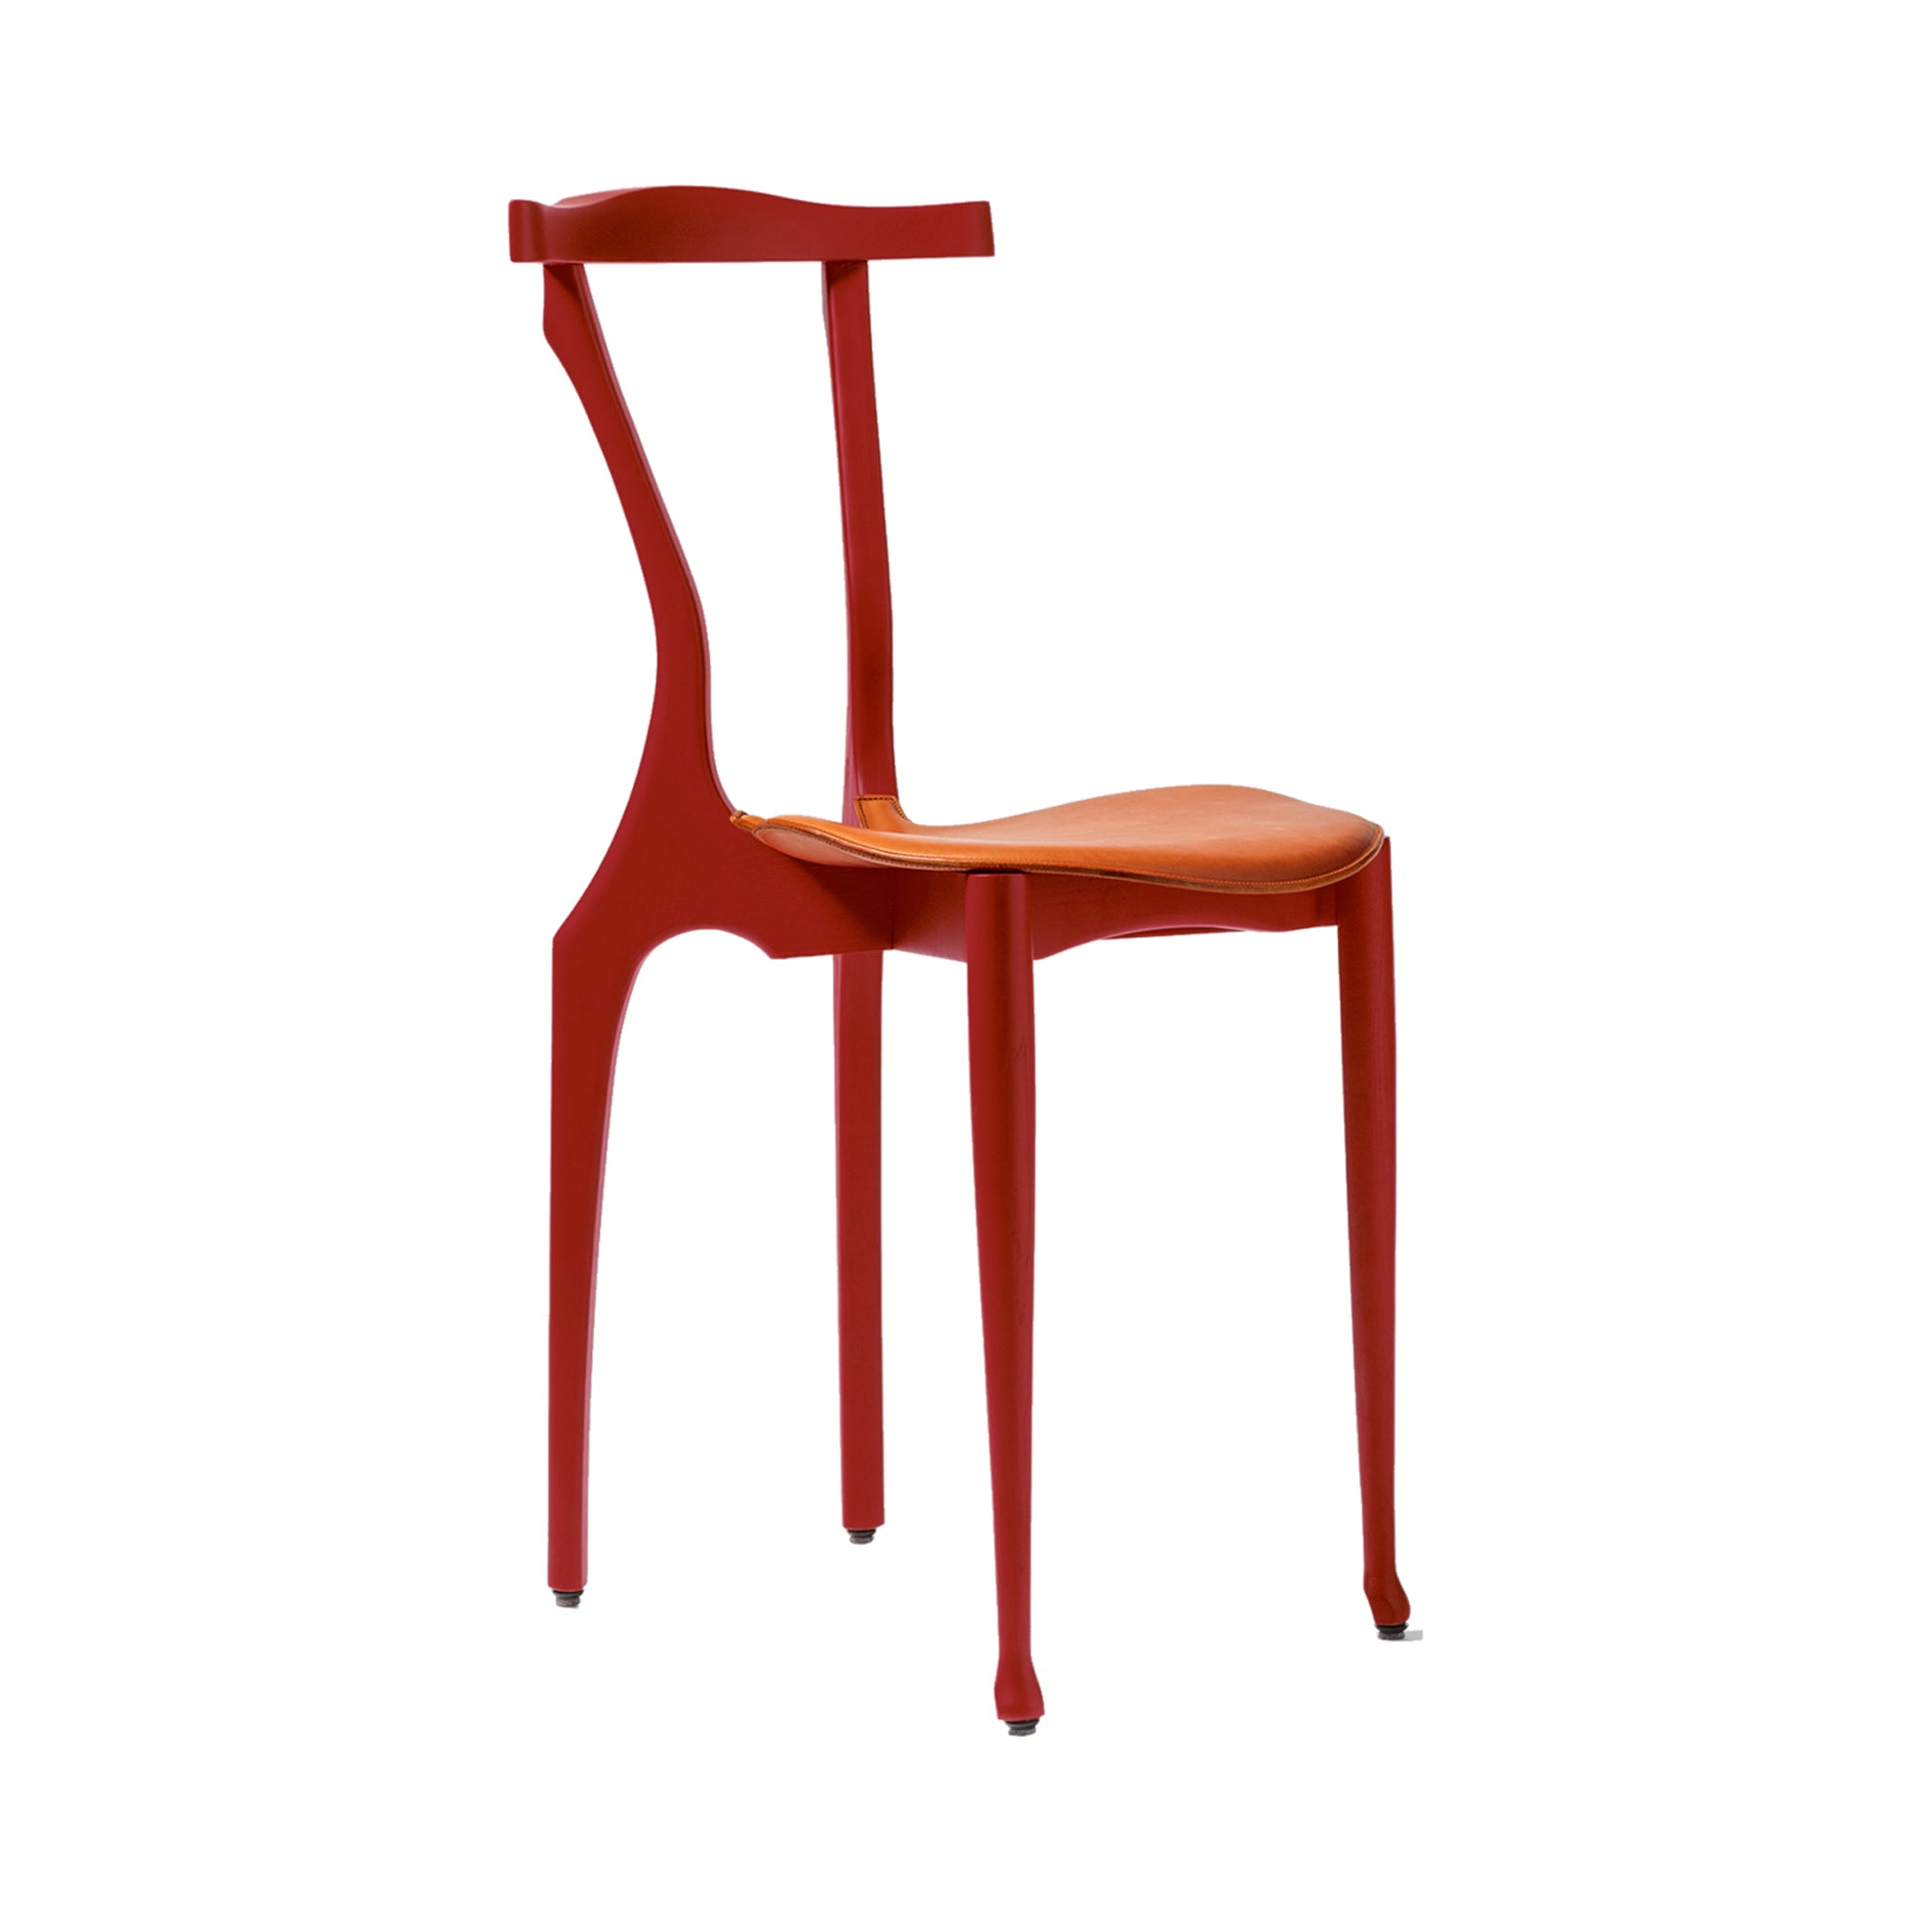 Gaulinetta Chair: Coral Red Lacquered Ash + Toasted